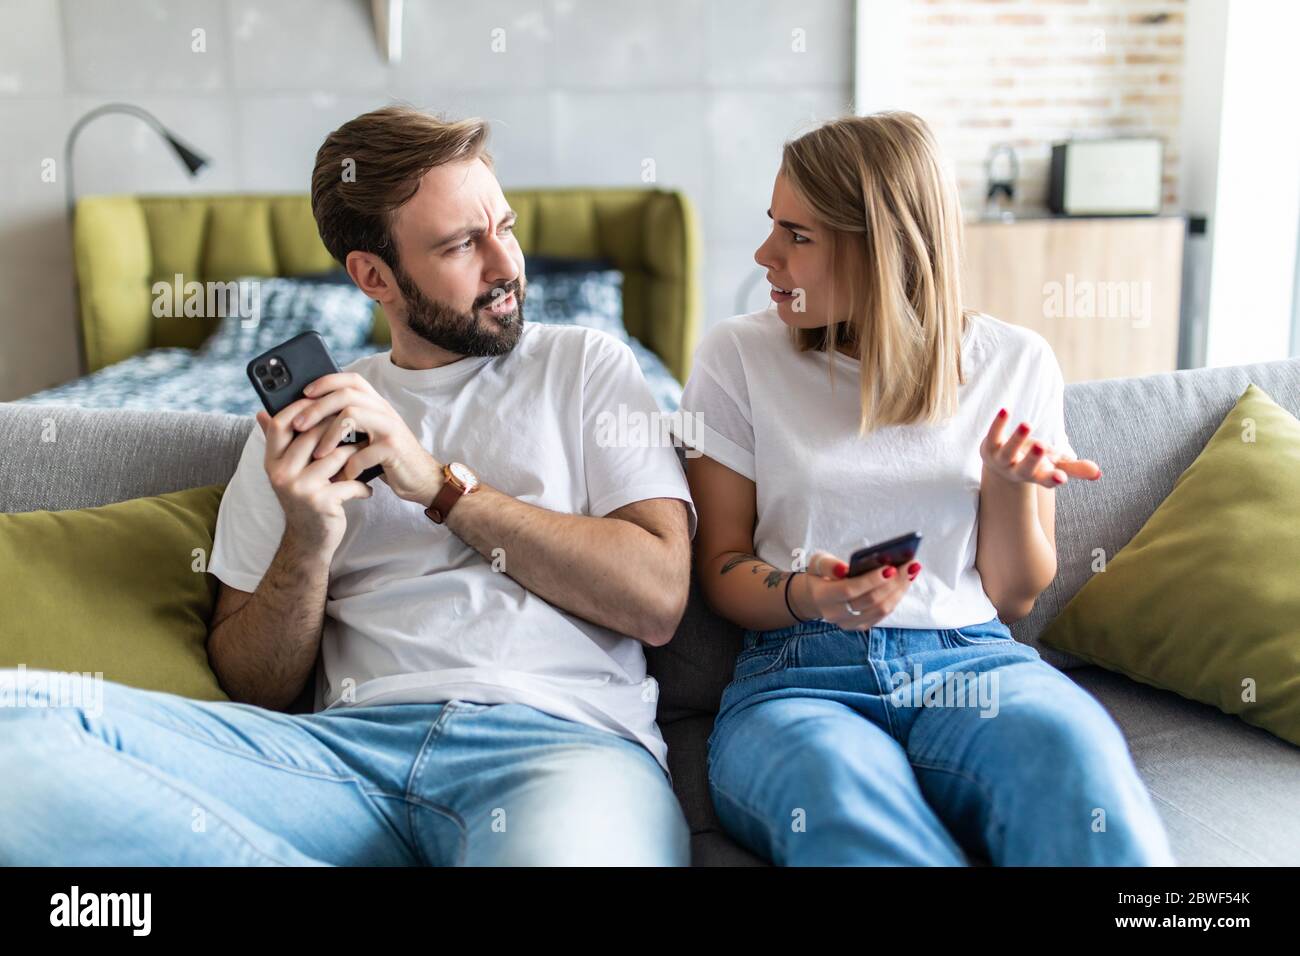 Jealous woman spying boyfriend and watching his mobile phone Stock Photo